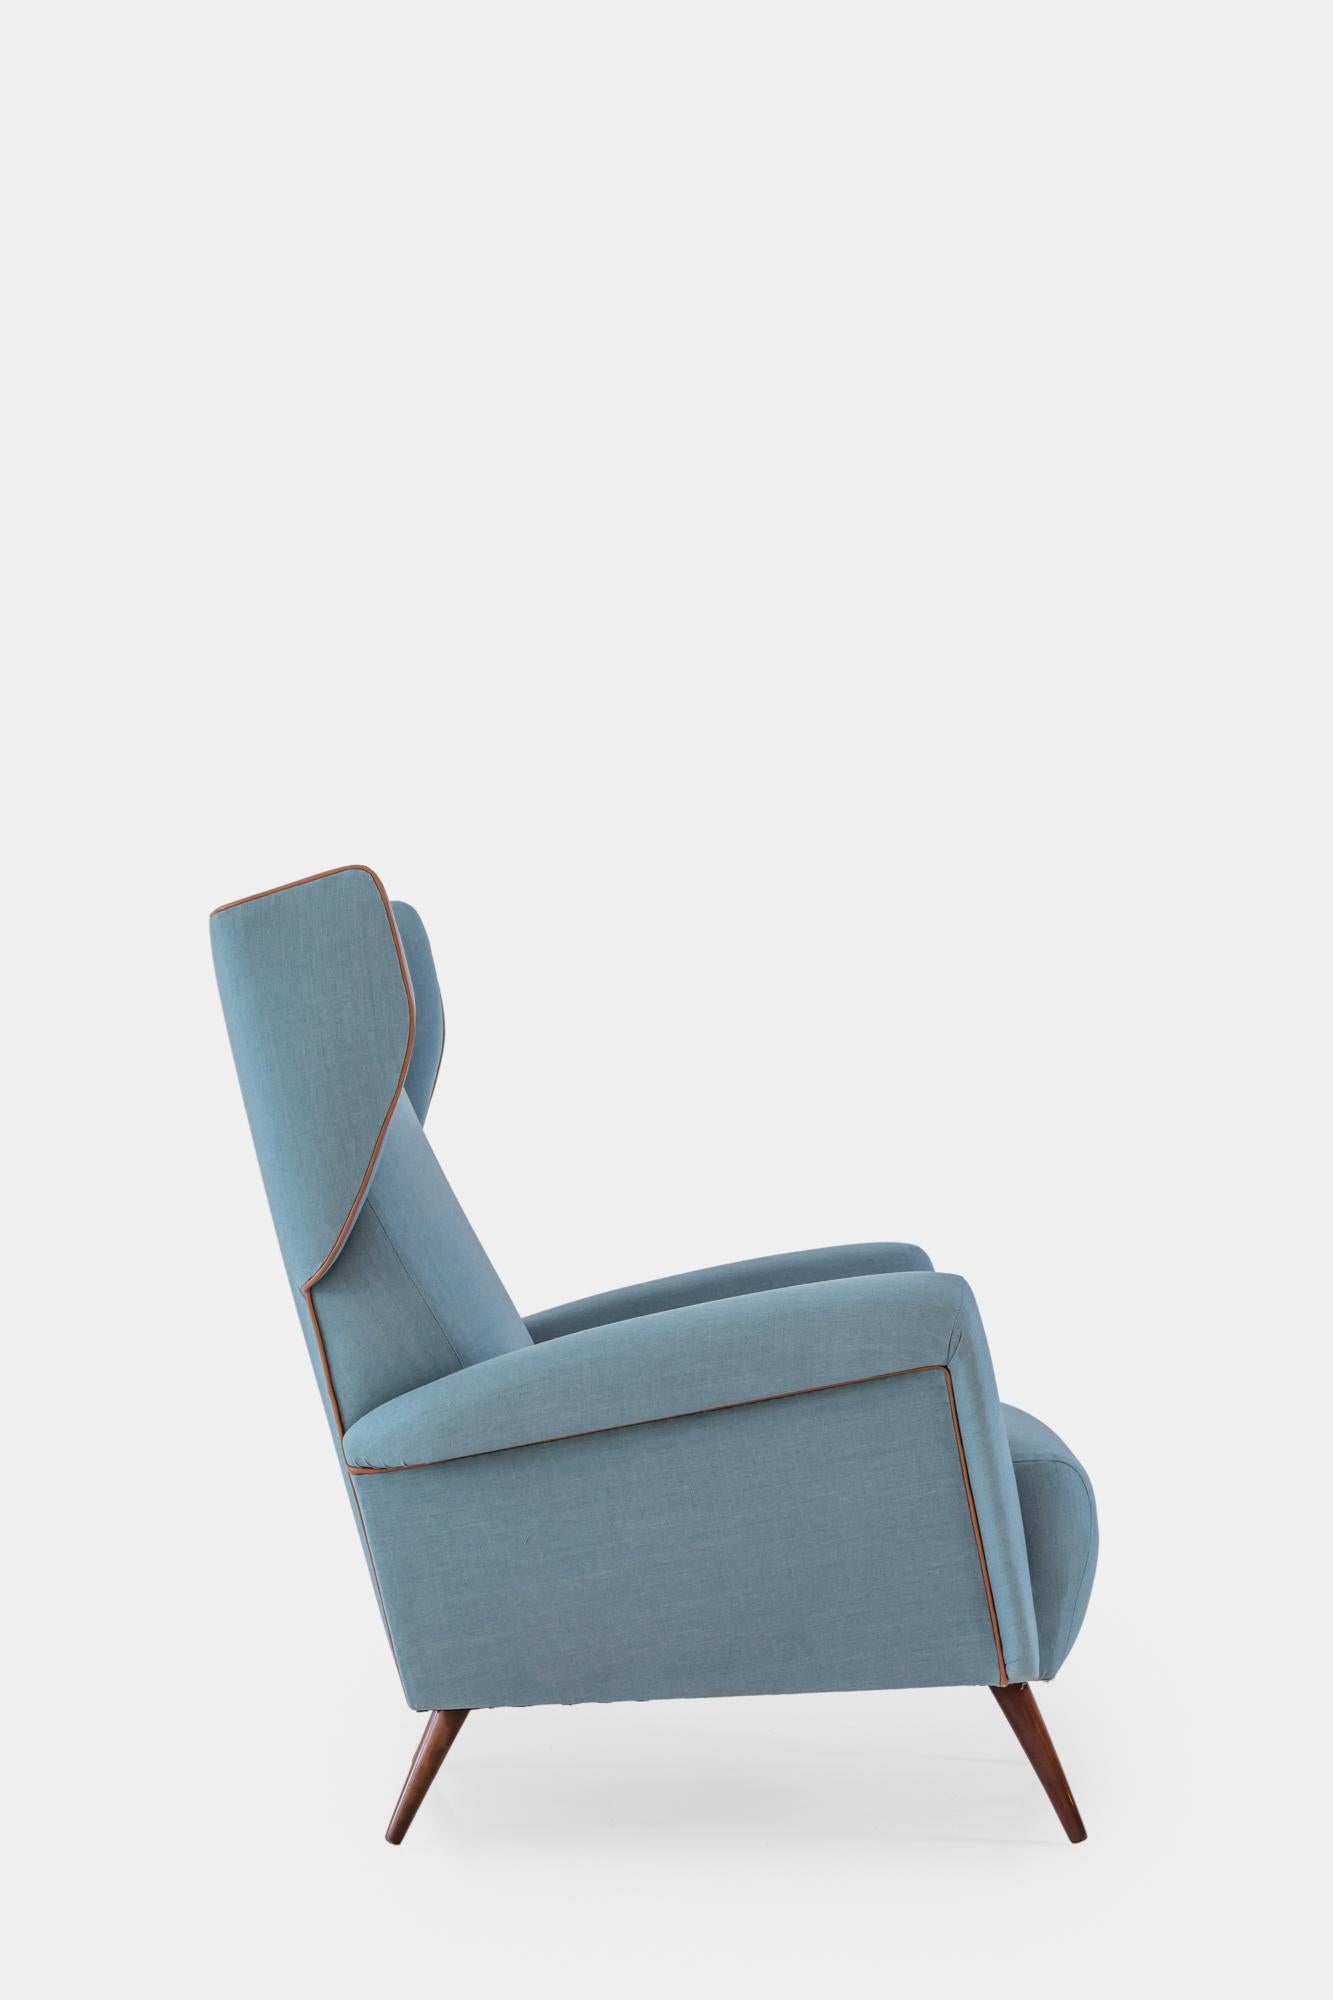 Designed by Gio Ponti for both Cassina and Dassi, light blue wool with leather piping upholstered lounge chair with the classic shape of a wingback chair but with the modernist lines and expression exemplary of Pont's work.
Fully restored and newly